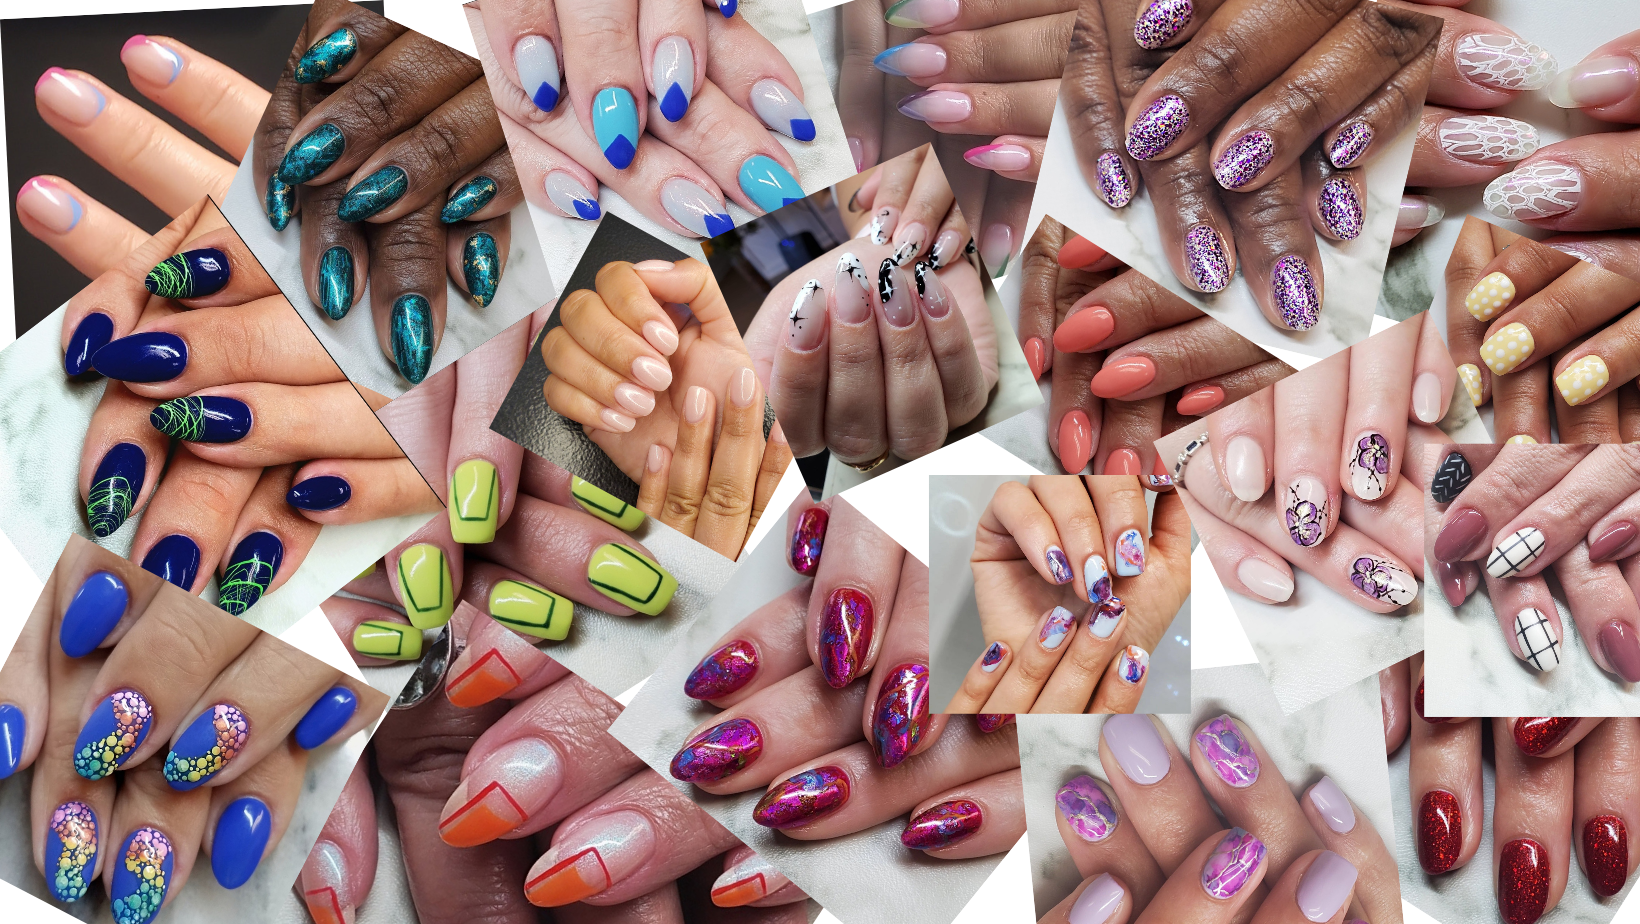 East Bay Nail and Beauty Lab